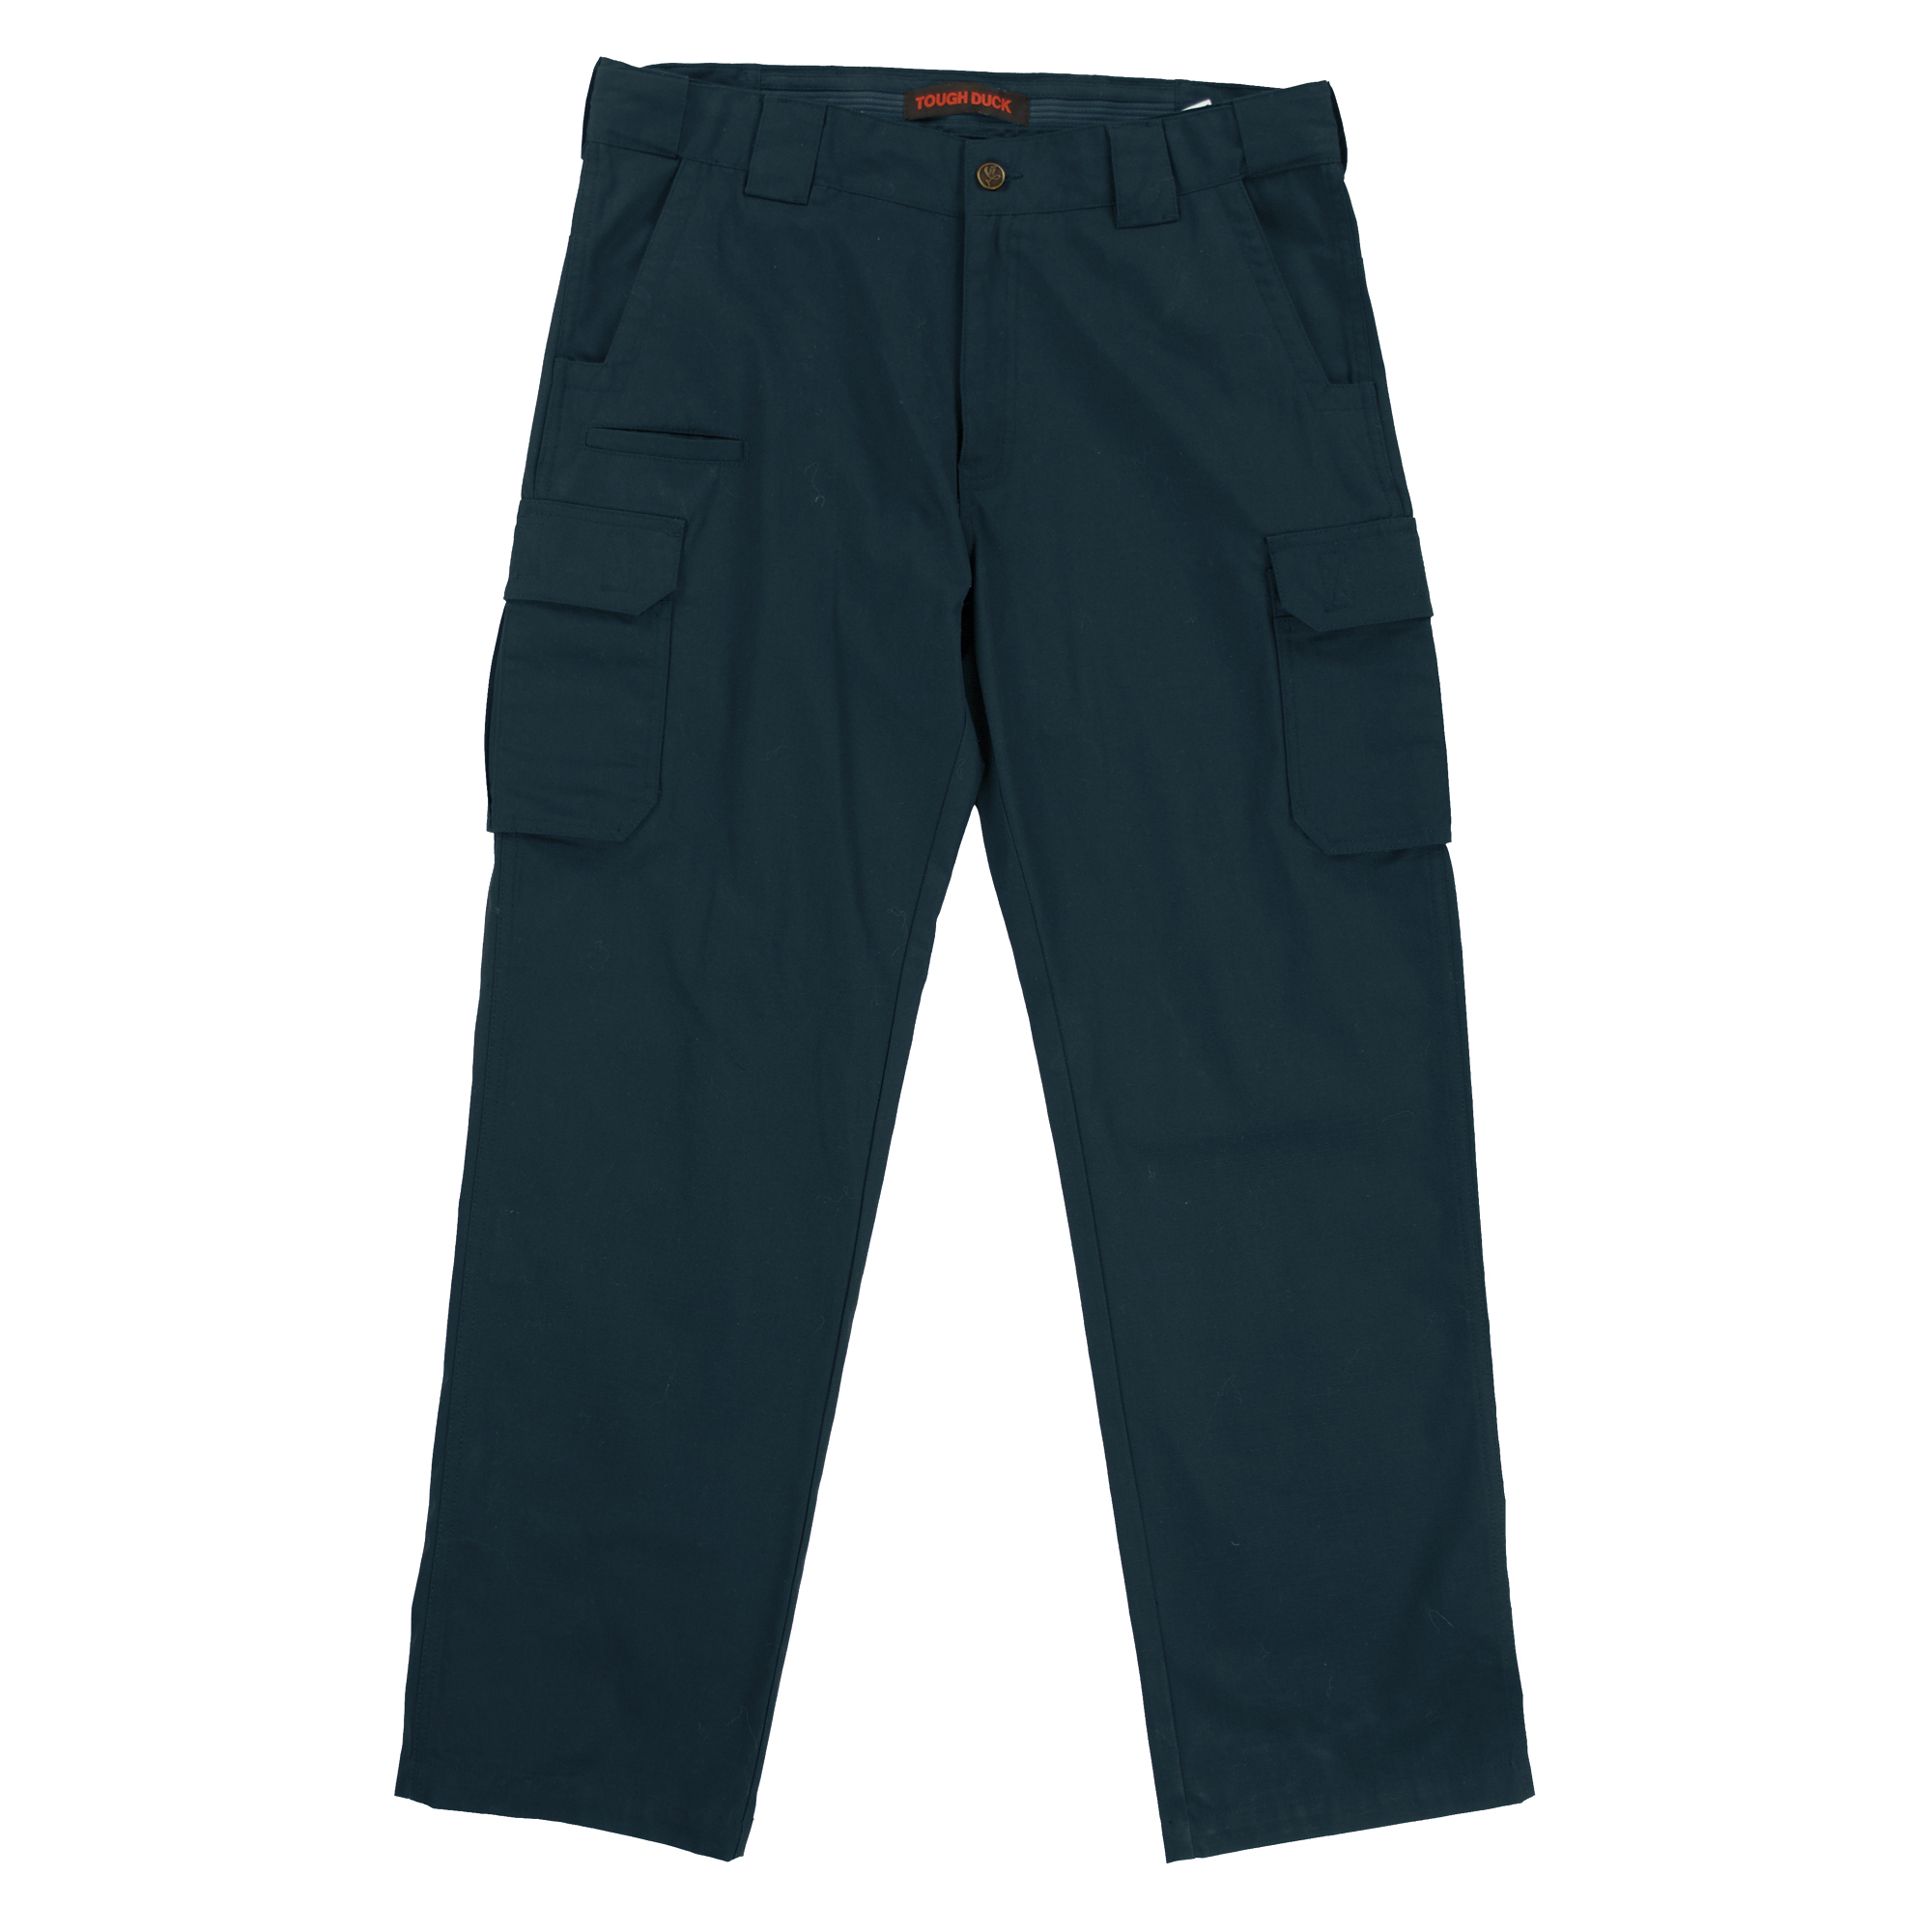 Tough Duck, Ripstop Cargo Pant, Waist 52 in, Inseam 30 in, Color Navy, Model WP110